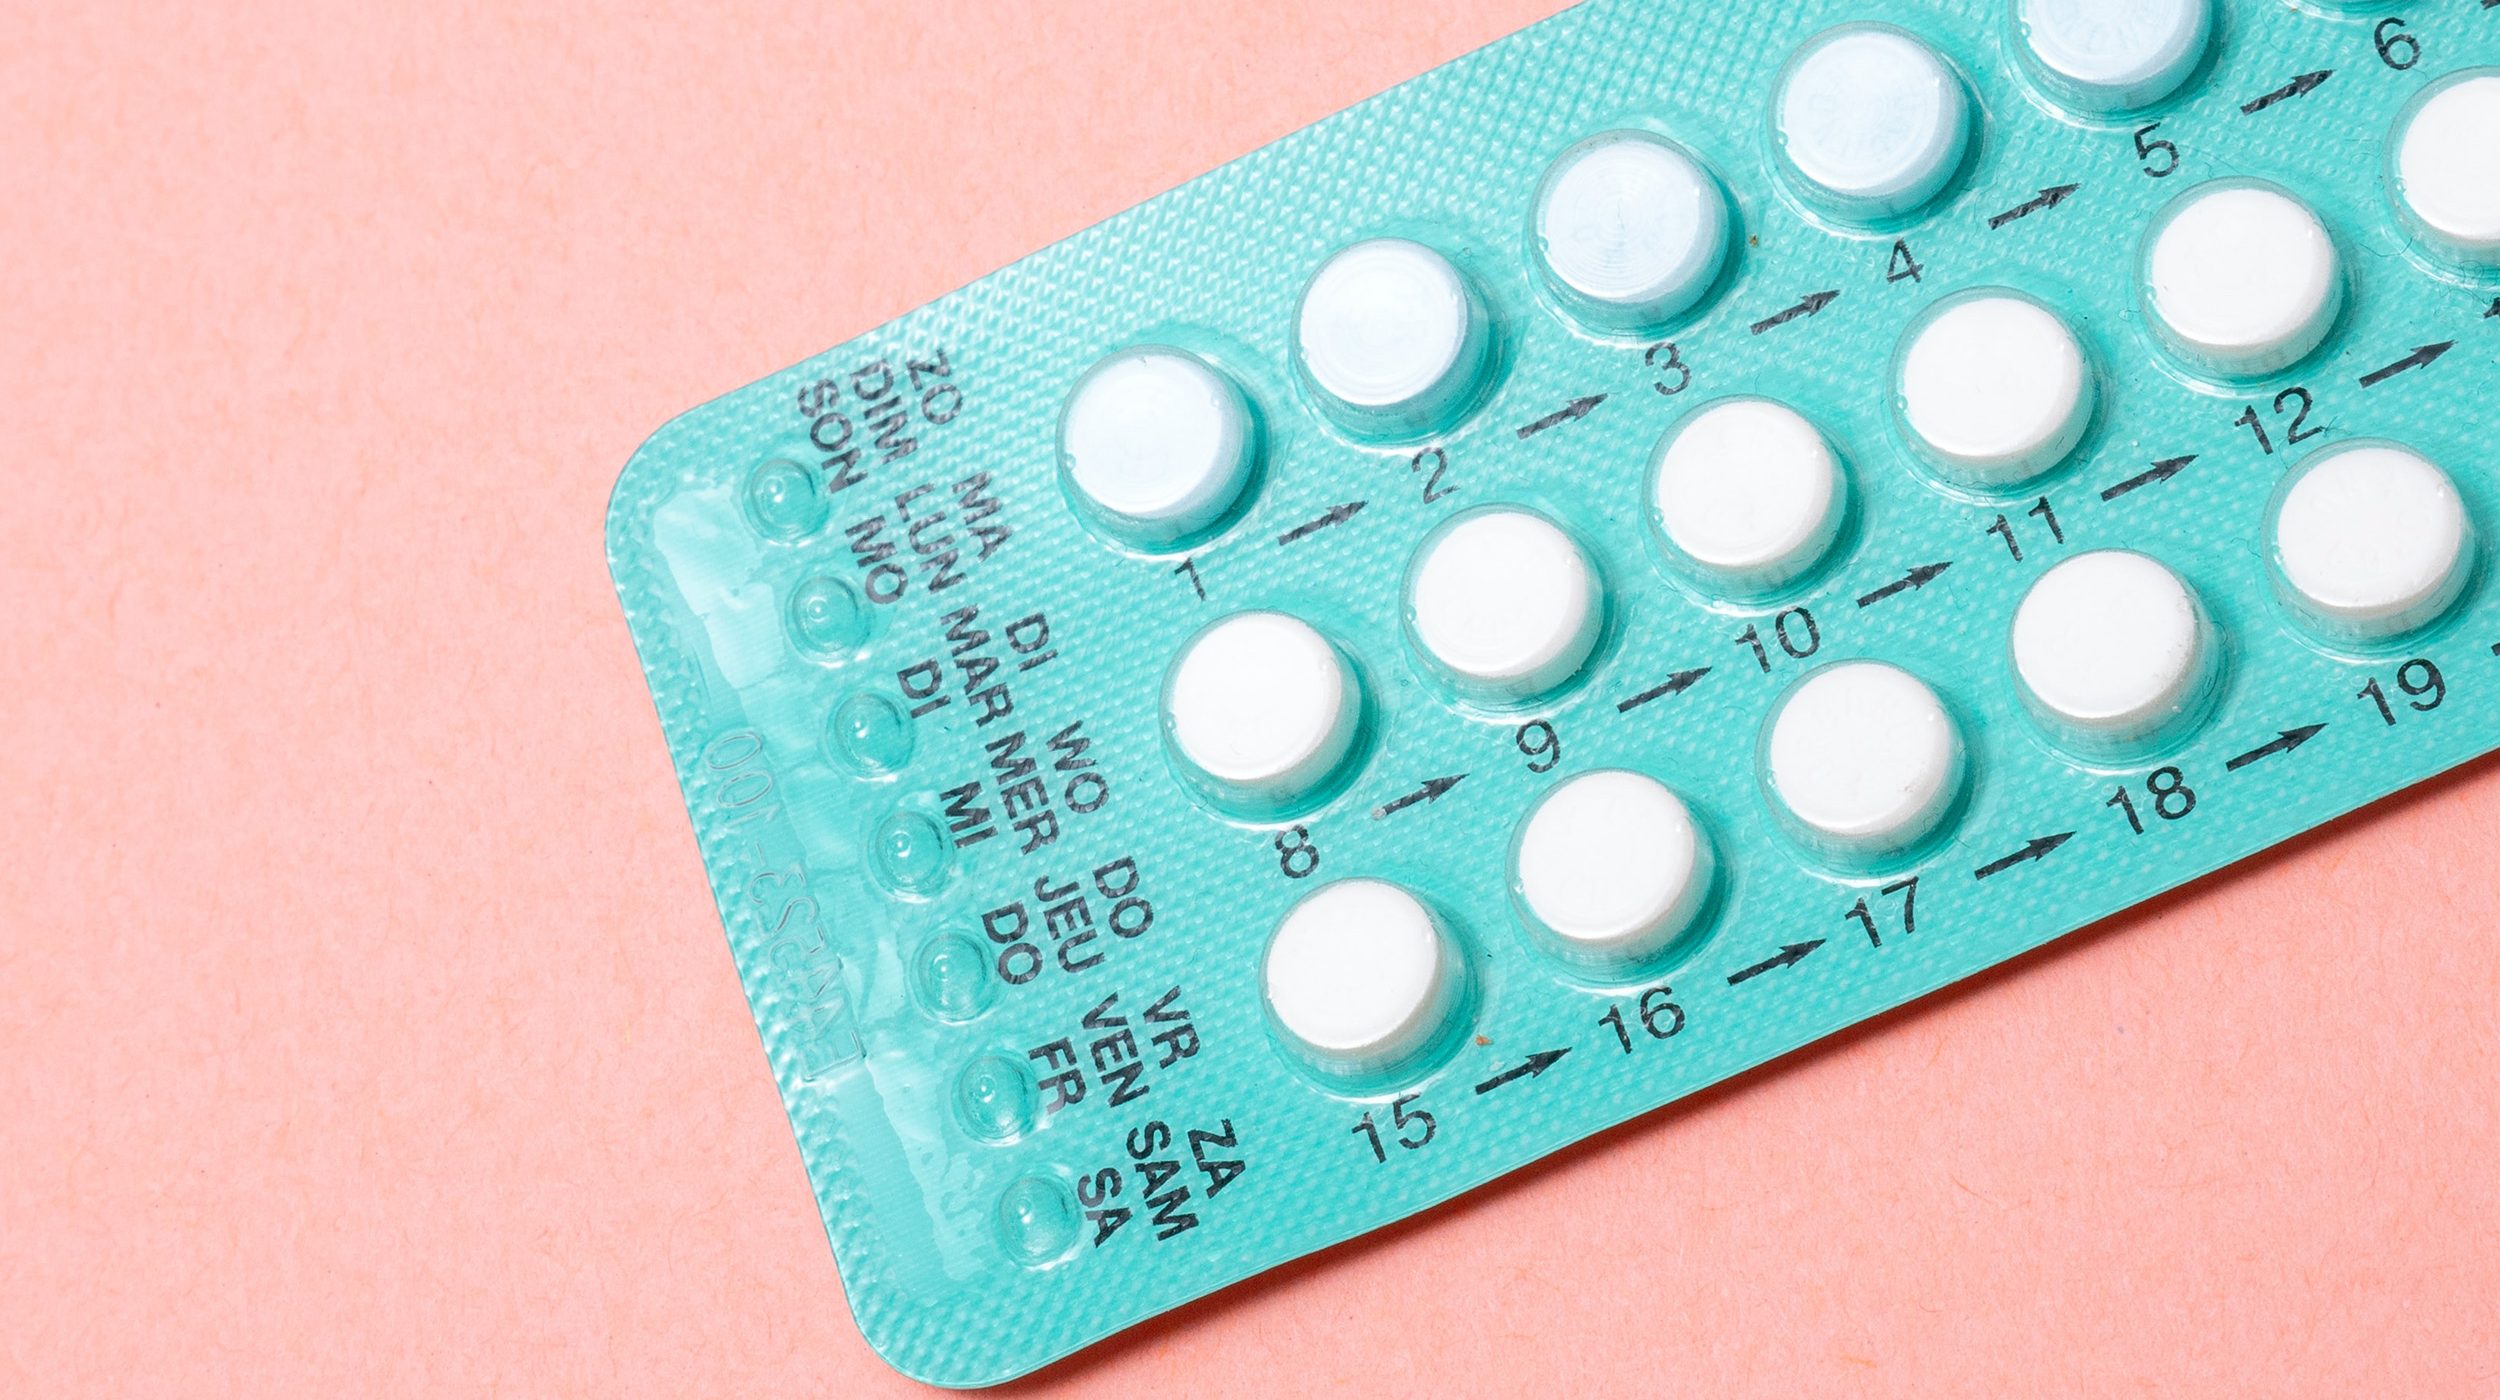 female contraceptives (link to file)